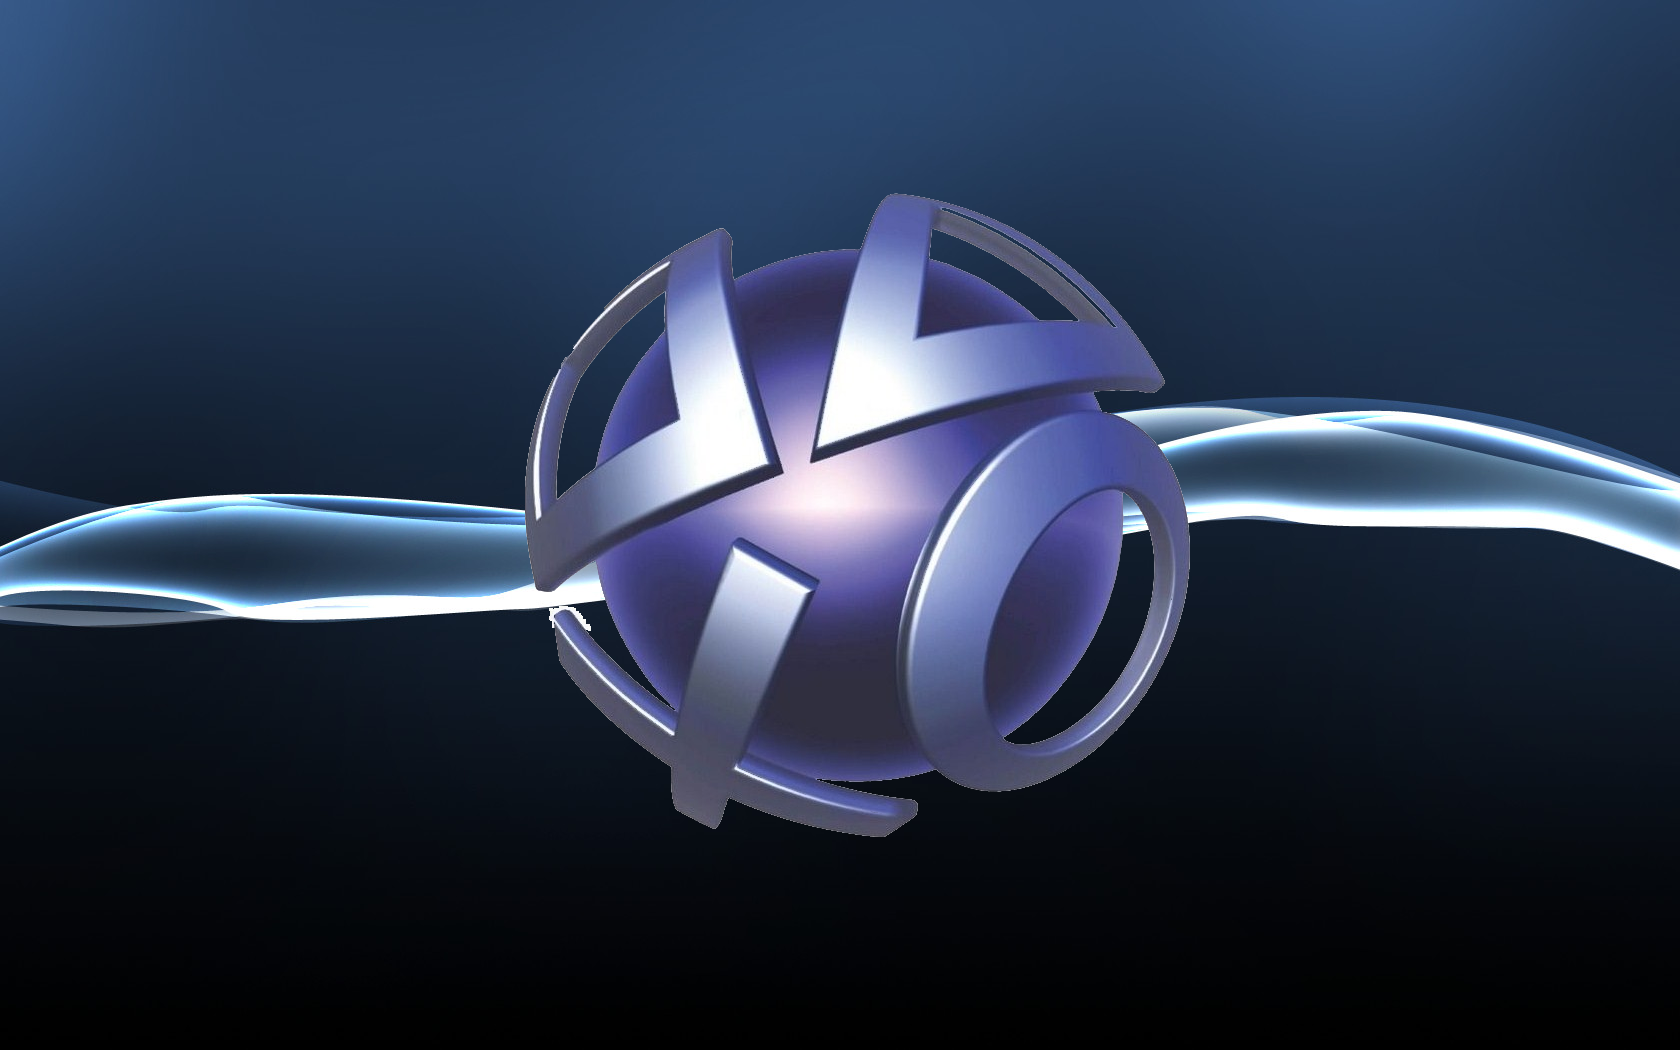 PSN features: trophies and gift cards My Image Host